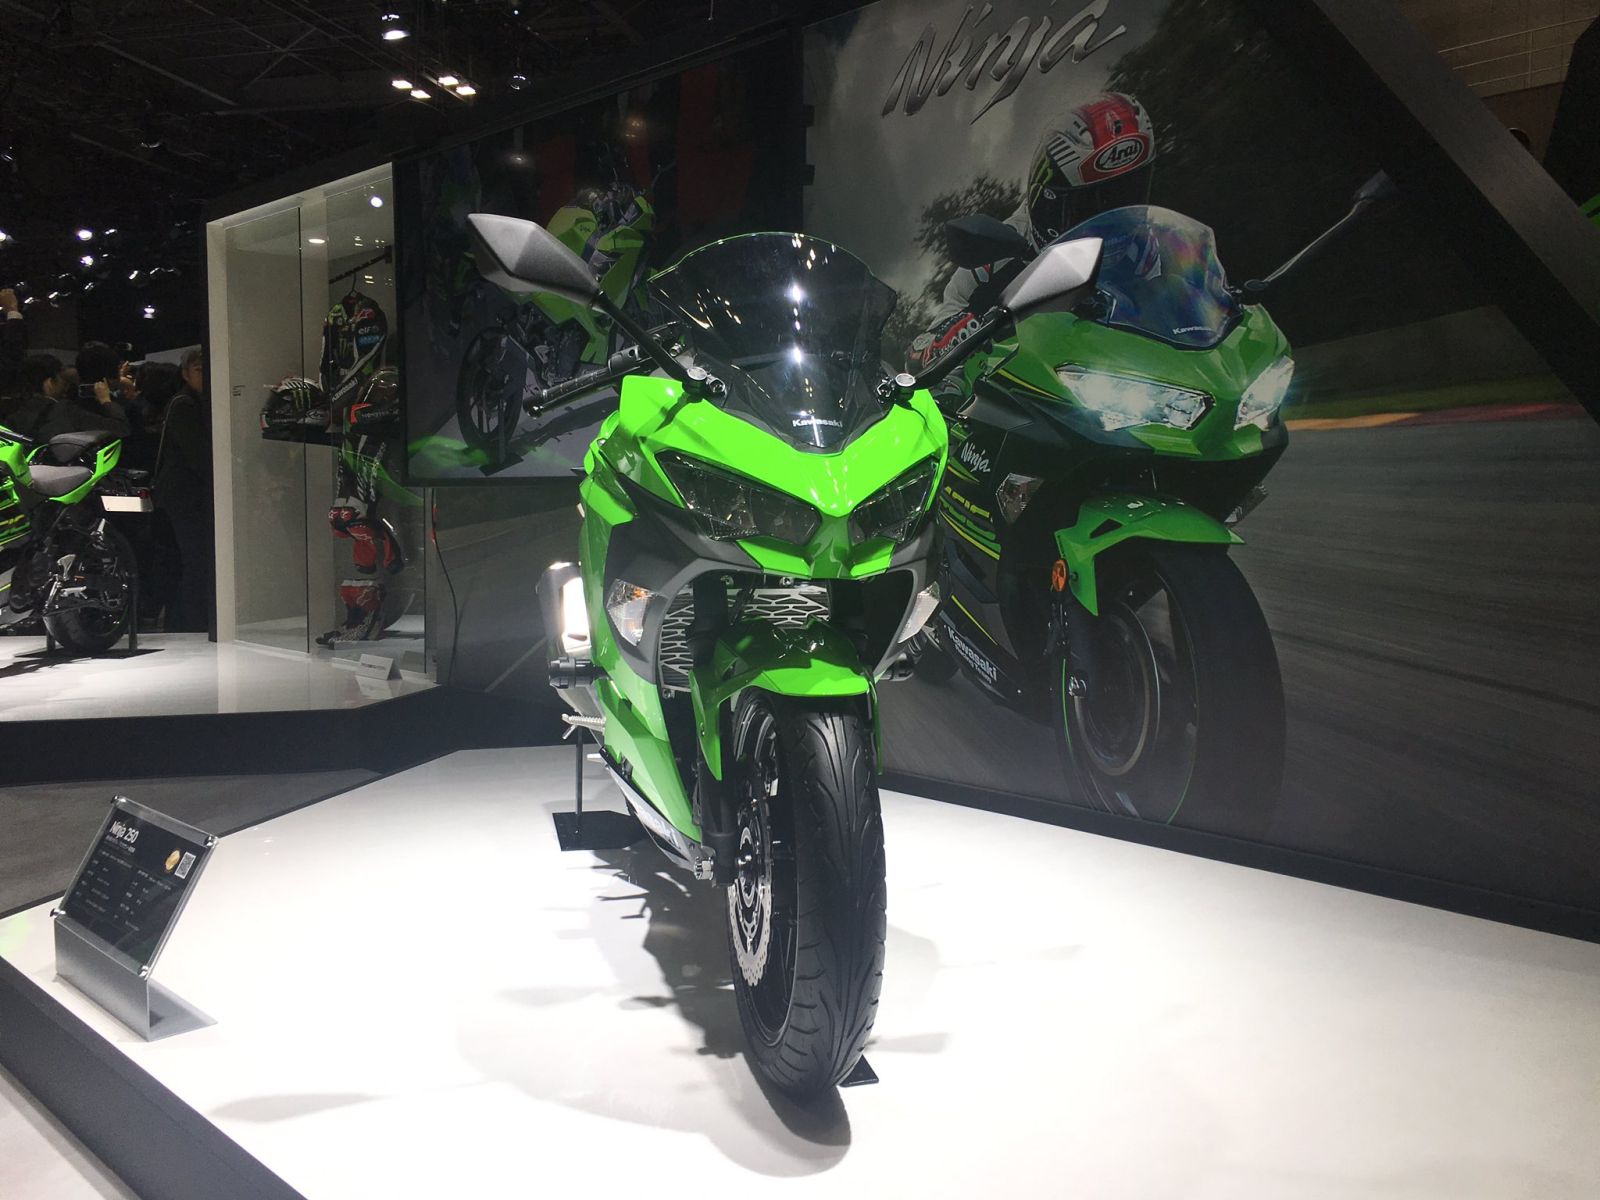 2018 Kawasaki Ninja 250 Images, Features, Tech Specs And All You Need To